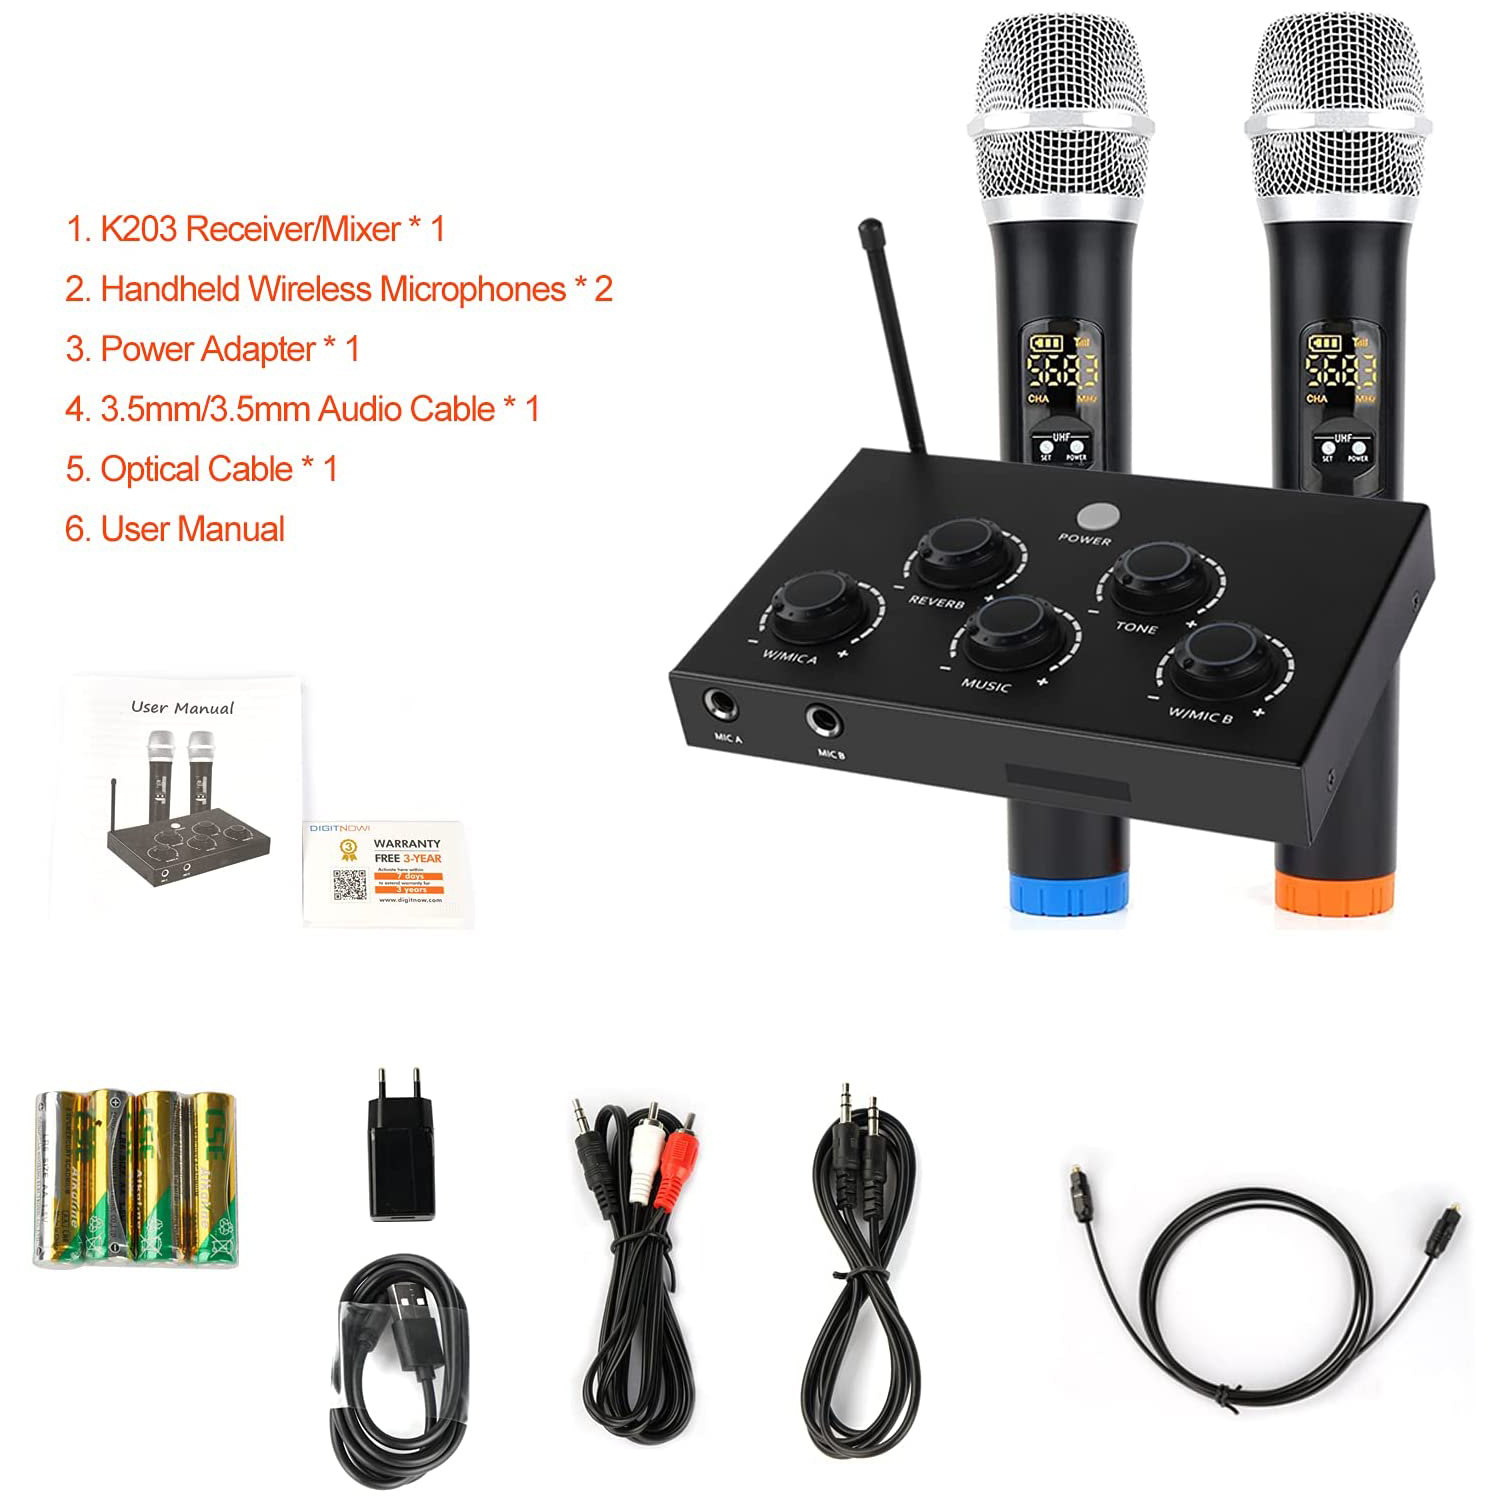  Rybozen Wireless Microphone Karaoke Mixer System, Dual Handheld  Wireless Microphone for Karaoke, Smart TV, PC, Speaker, Amplifier, Church,  Wedding - Support HDMI, AUX In/Out : Musical Instruments